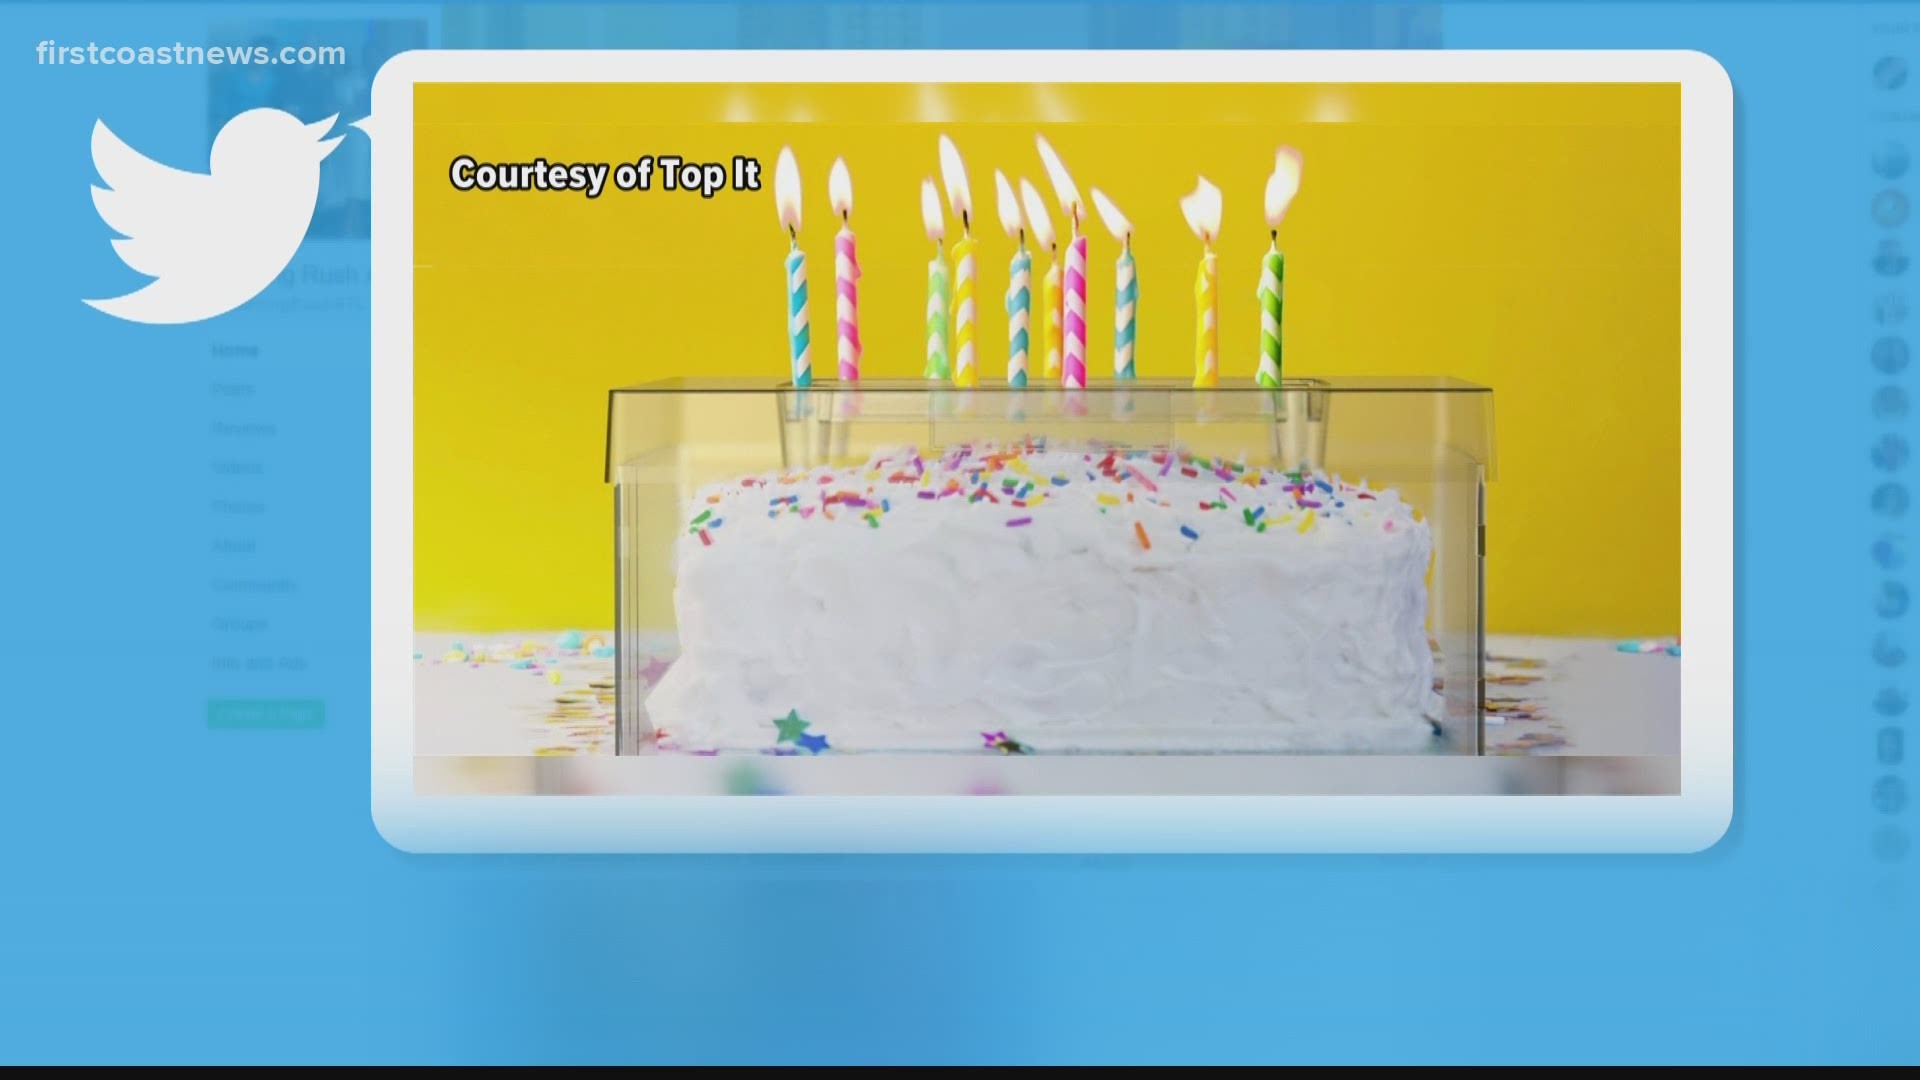 A Florida dentist invented the shields to allow birthday boys and girls to blow out their candles, but protect the cake from germs.